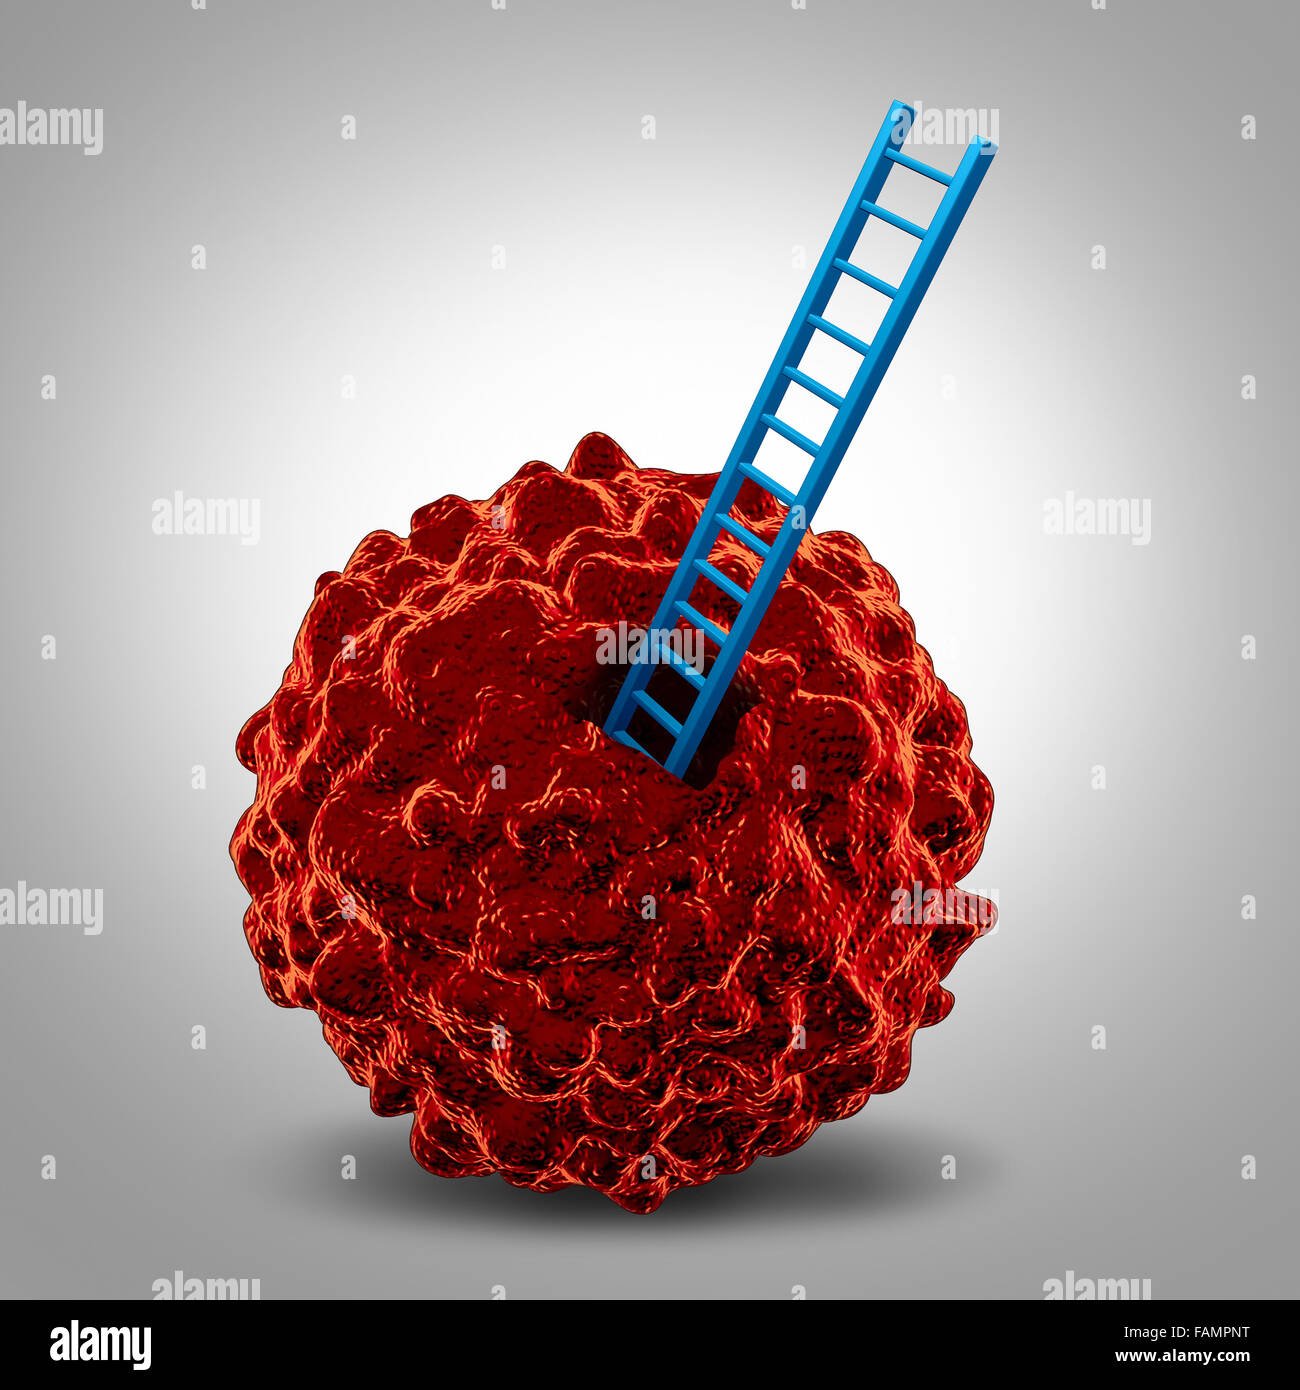 Cancer research symbol as a cancerous malignant cell with a ladder going in as a metaphor for a close microscopic medical examination and finding a cure icon. Stock Photo